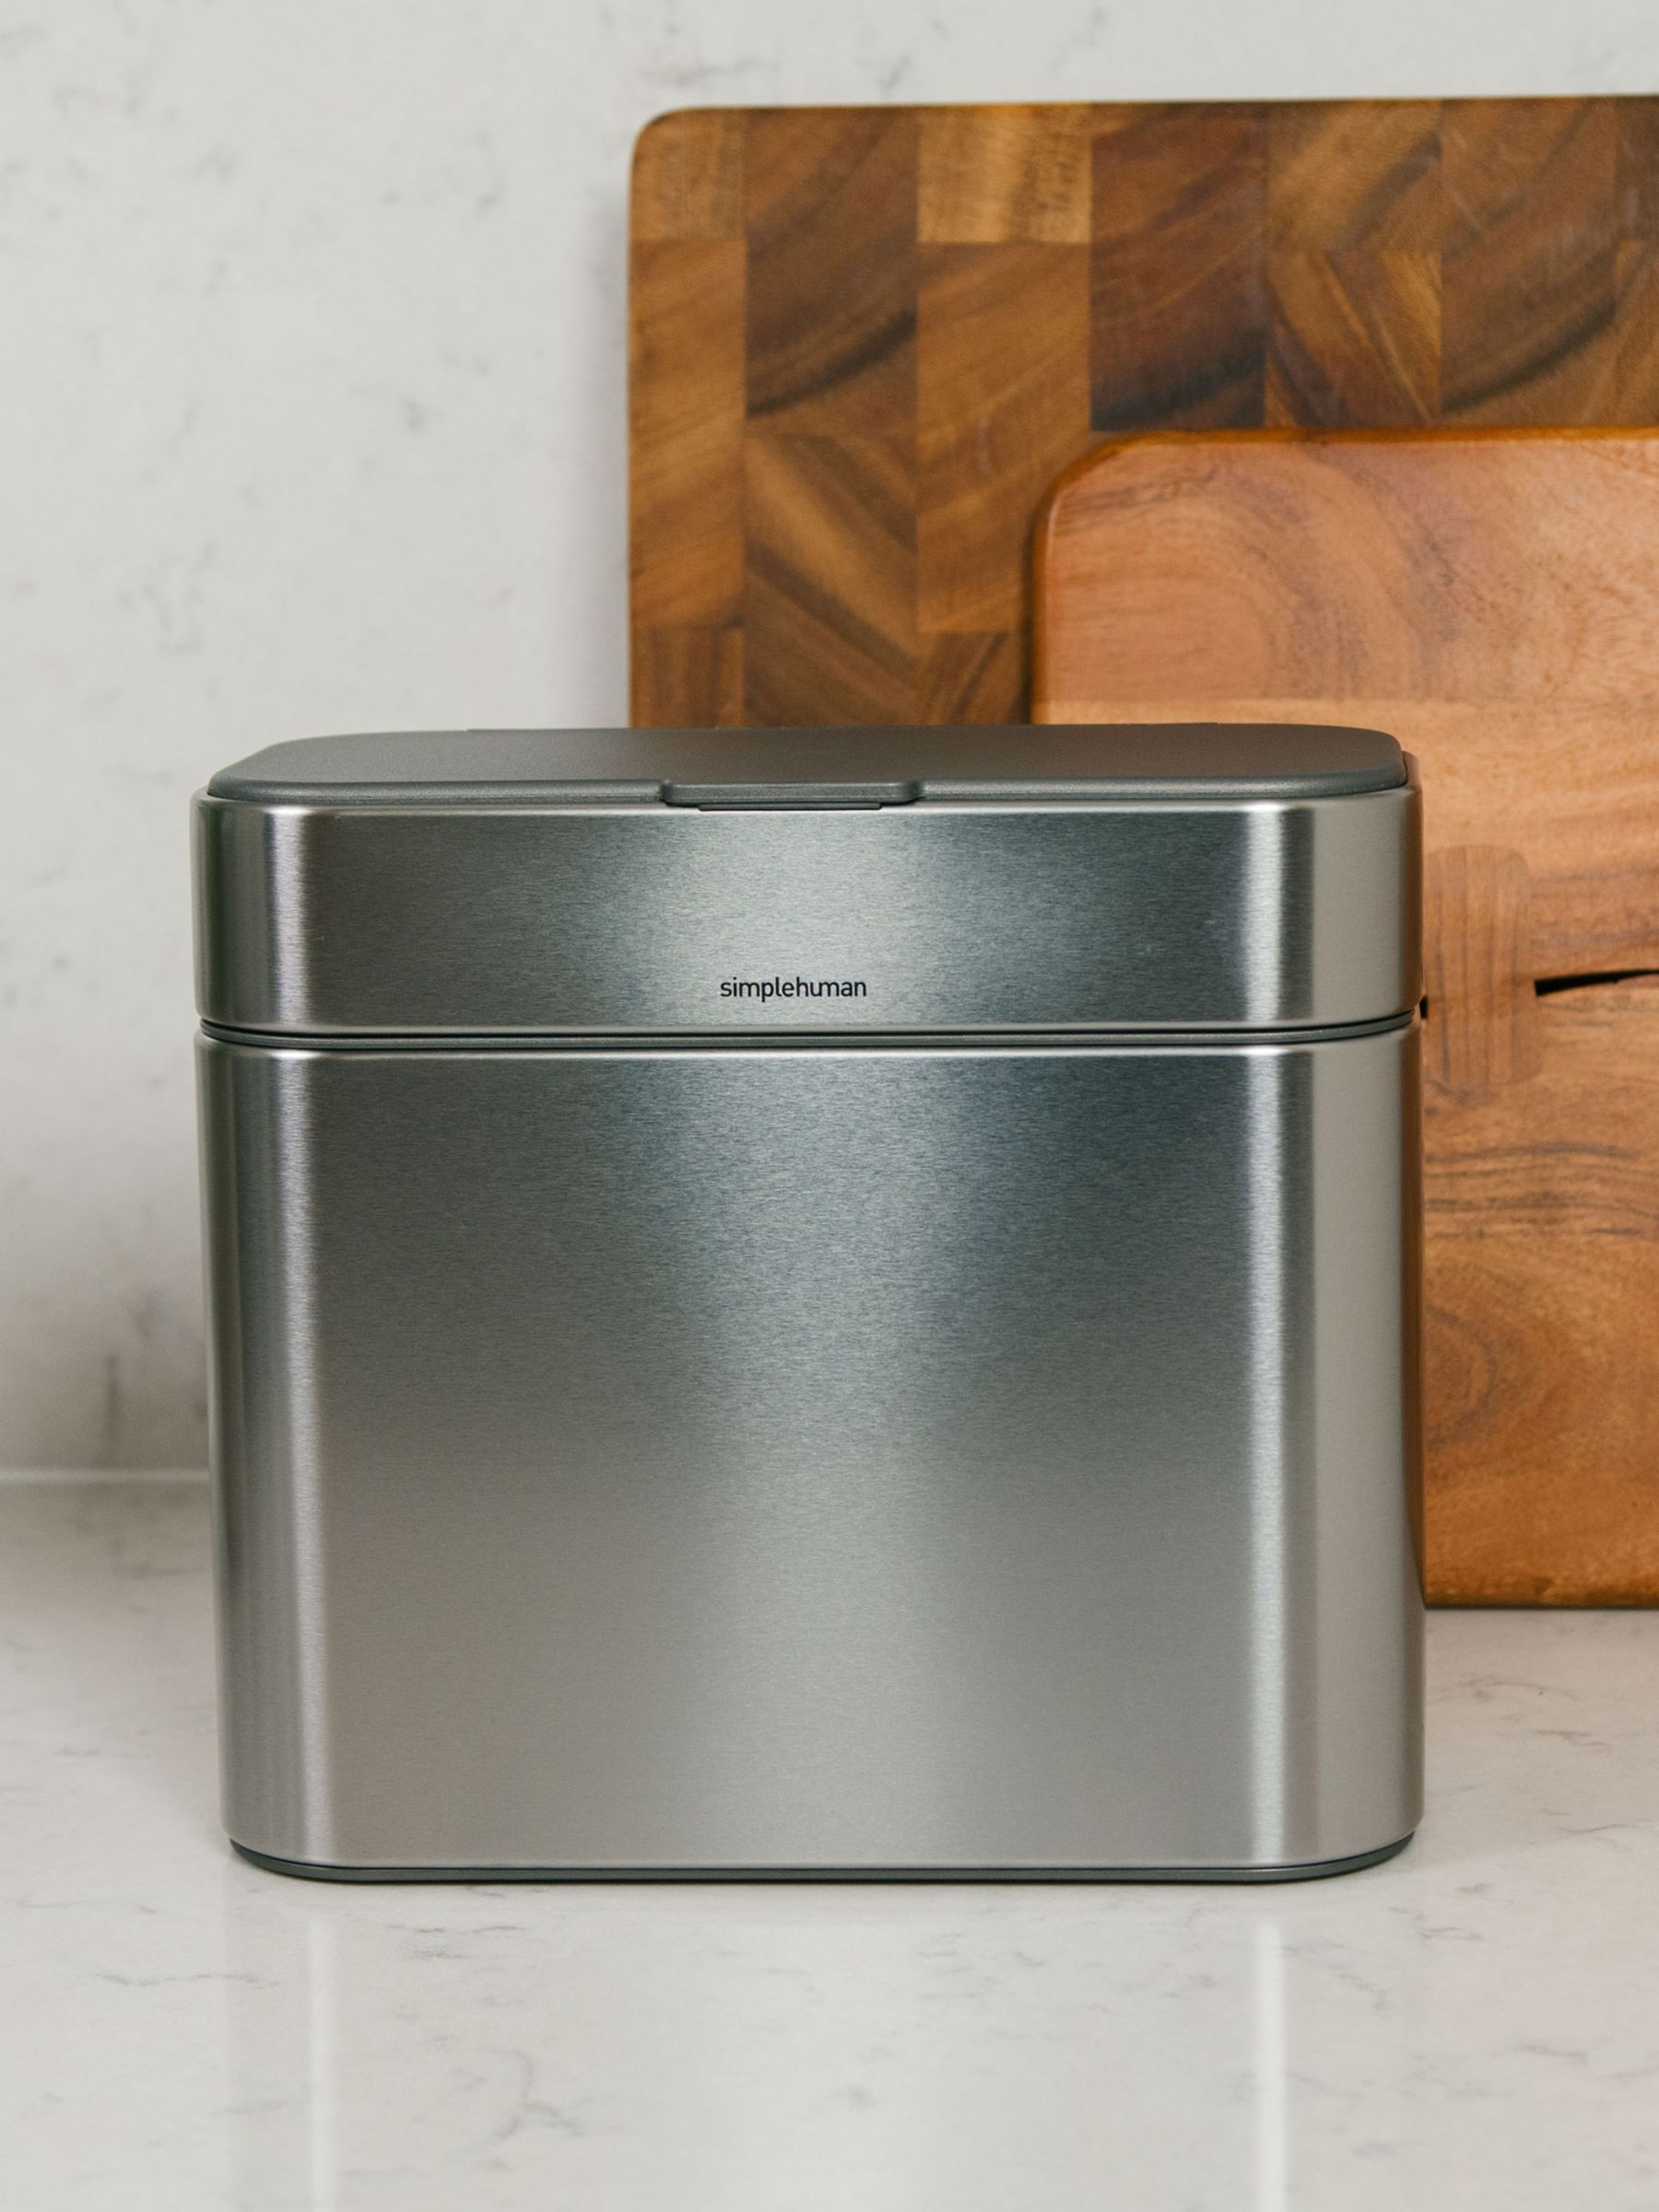 simplehuman Compost Caddy, 4L, Stainless Steel